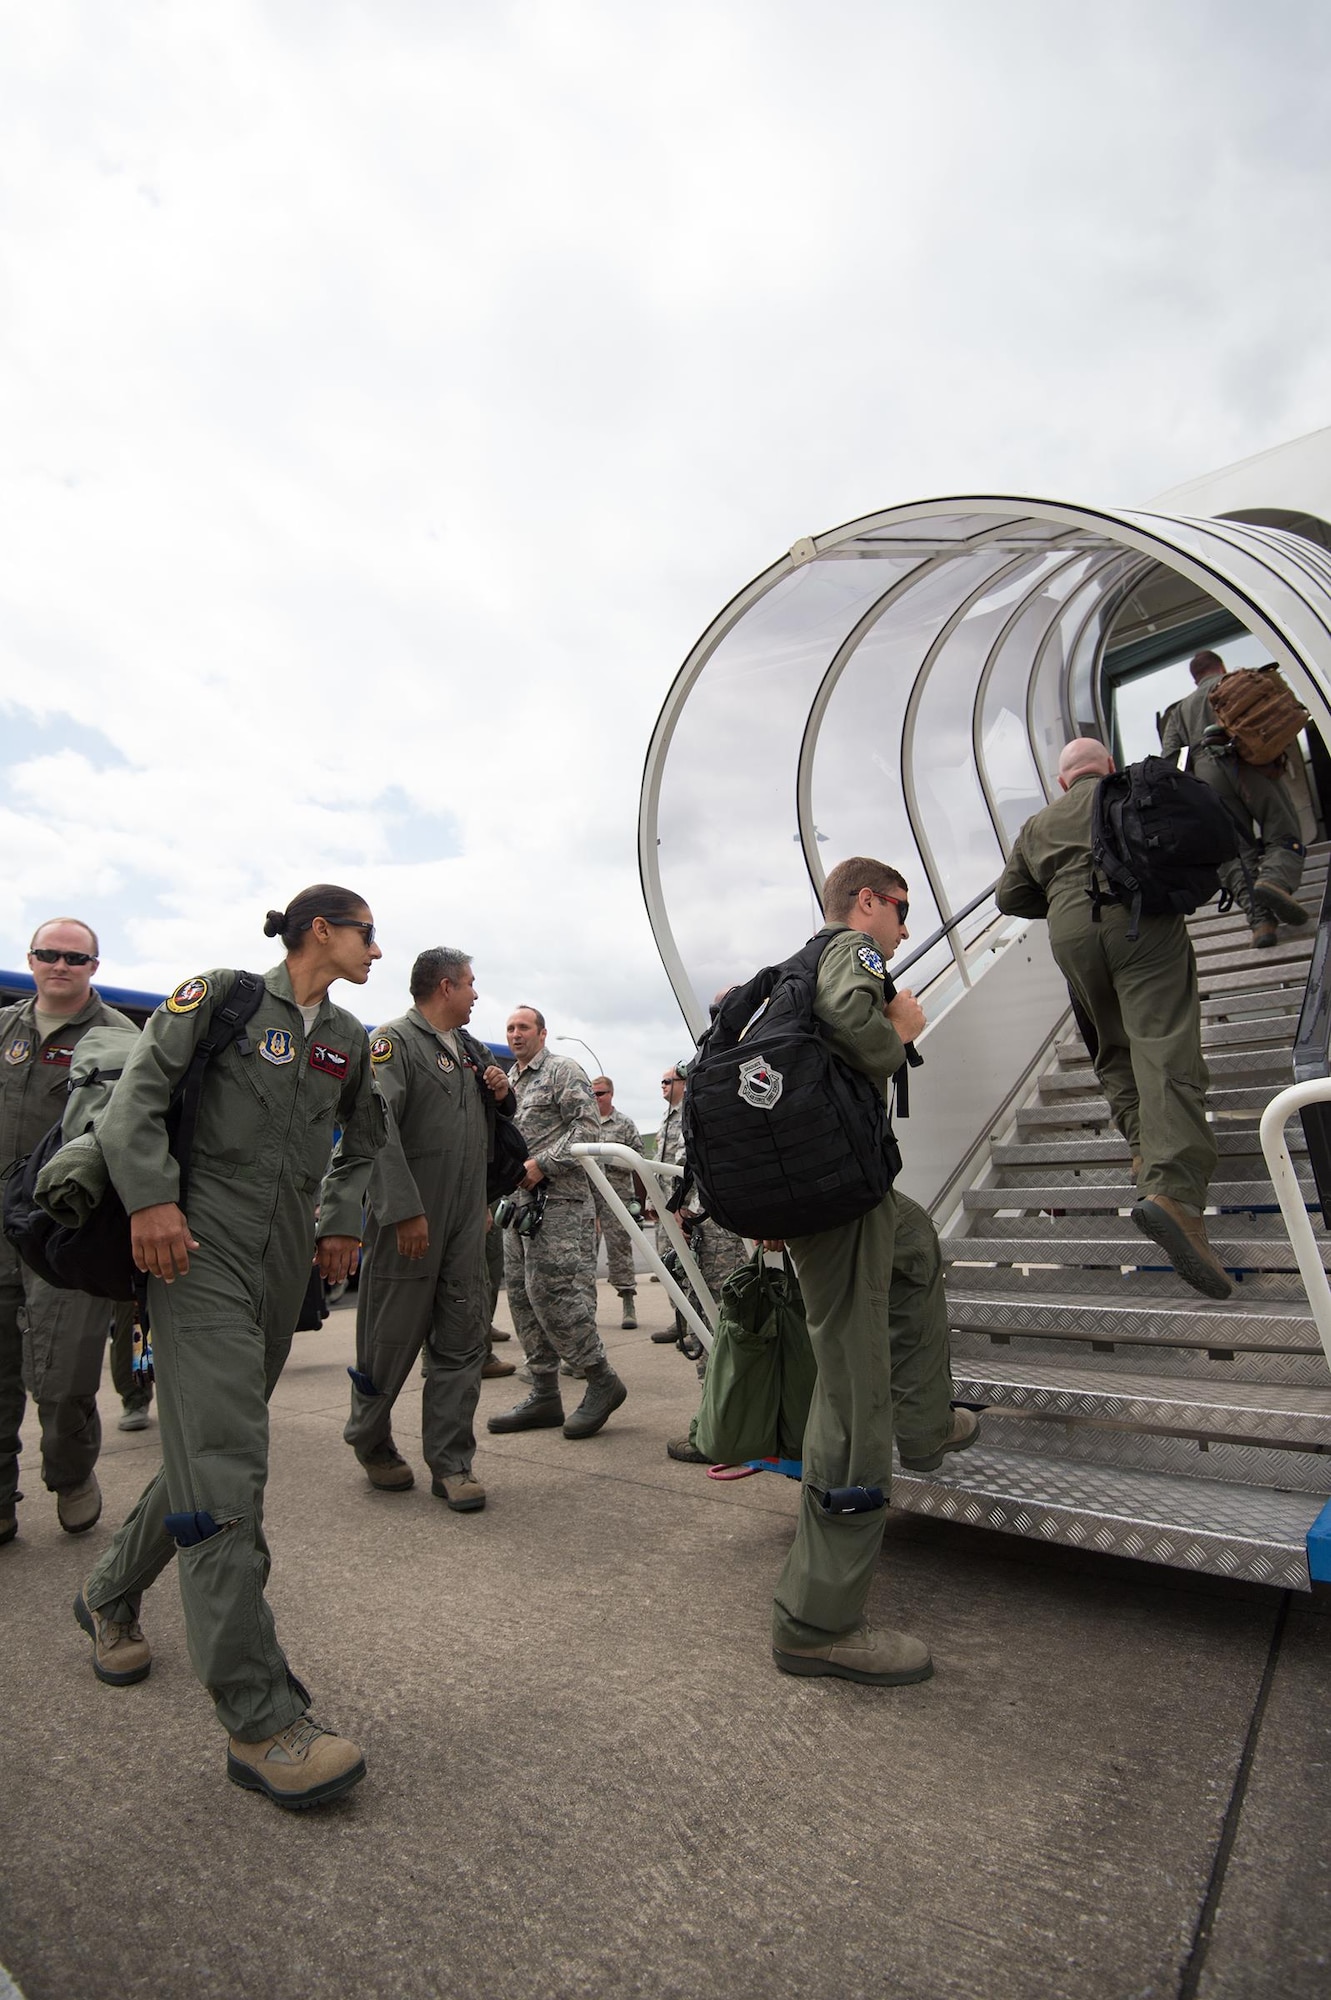 Aircrew reservists assigned to the 513th Air Control Group board an E-3 Sentry Airborne Warning and Control System aircraft June 12, 2017, at NATO Air Base Geilenkirchen, Germany, prior to a mission supporting the BALTOPS 2017 exercise. The E-3 Sentry and nearly 100 Reservists from the 513th are deployed in support of BALTOPS 2017, which is the first time a U.S. E-3 Sentry has supported a NATO exercise in 20 years. (U.S. Air Force photo/2nd Lt. Caleb Wanzer)